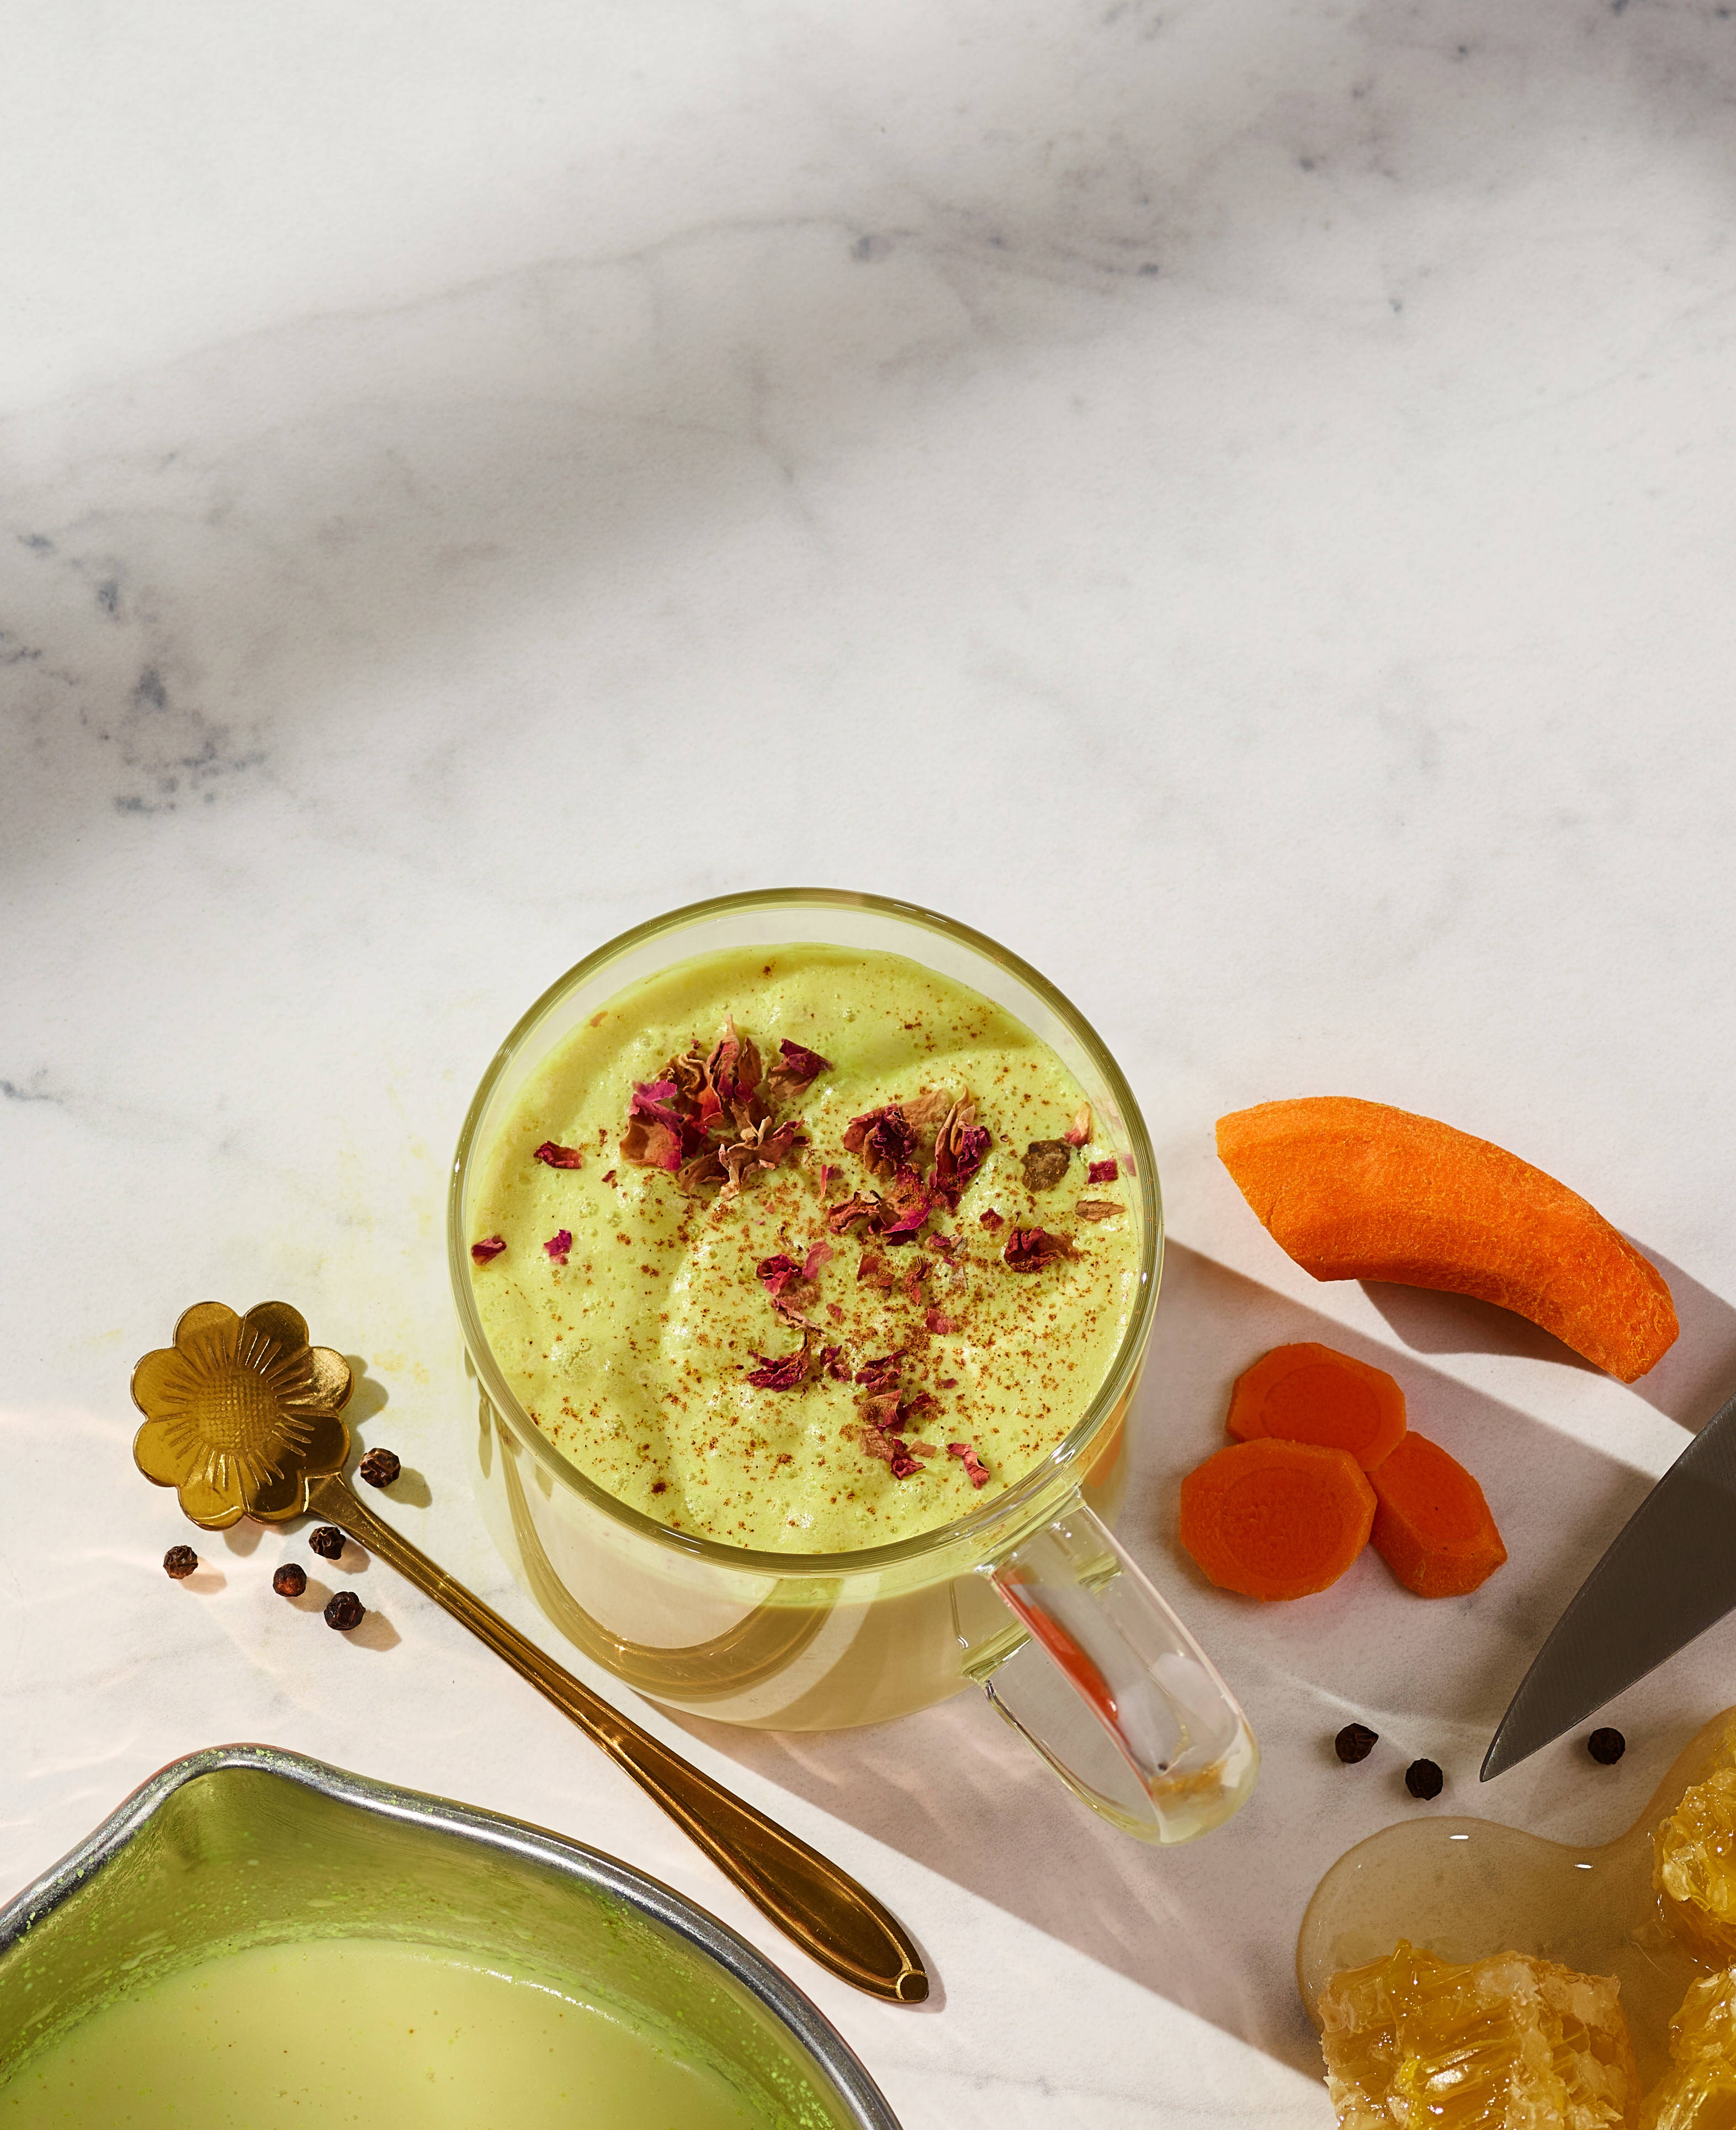 Get Cozy with a Golden Turmeric Latte